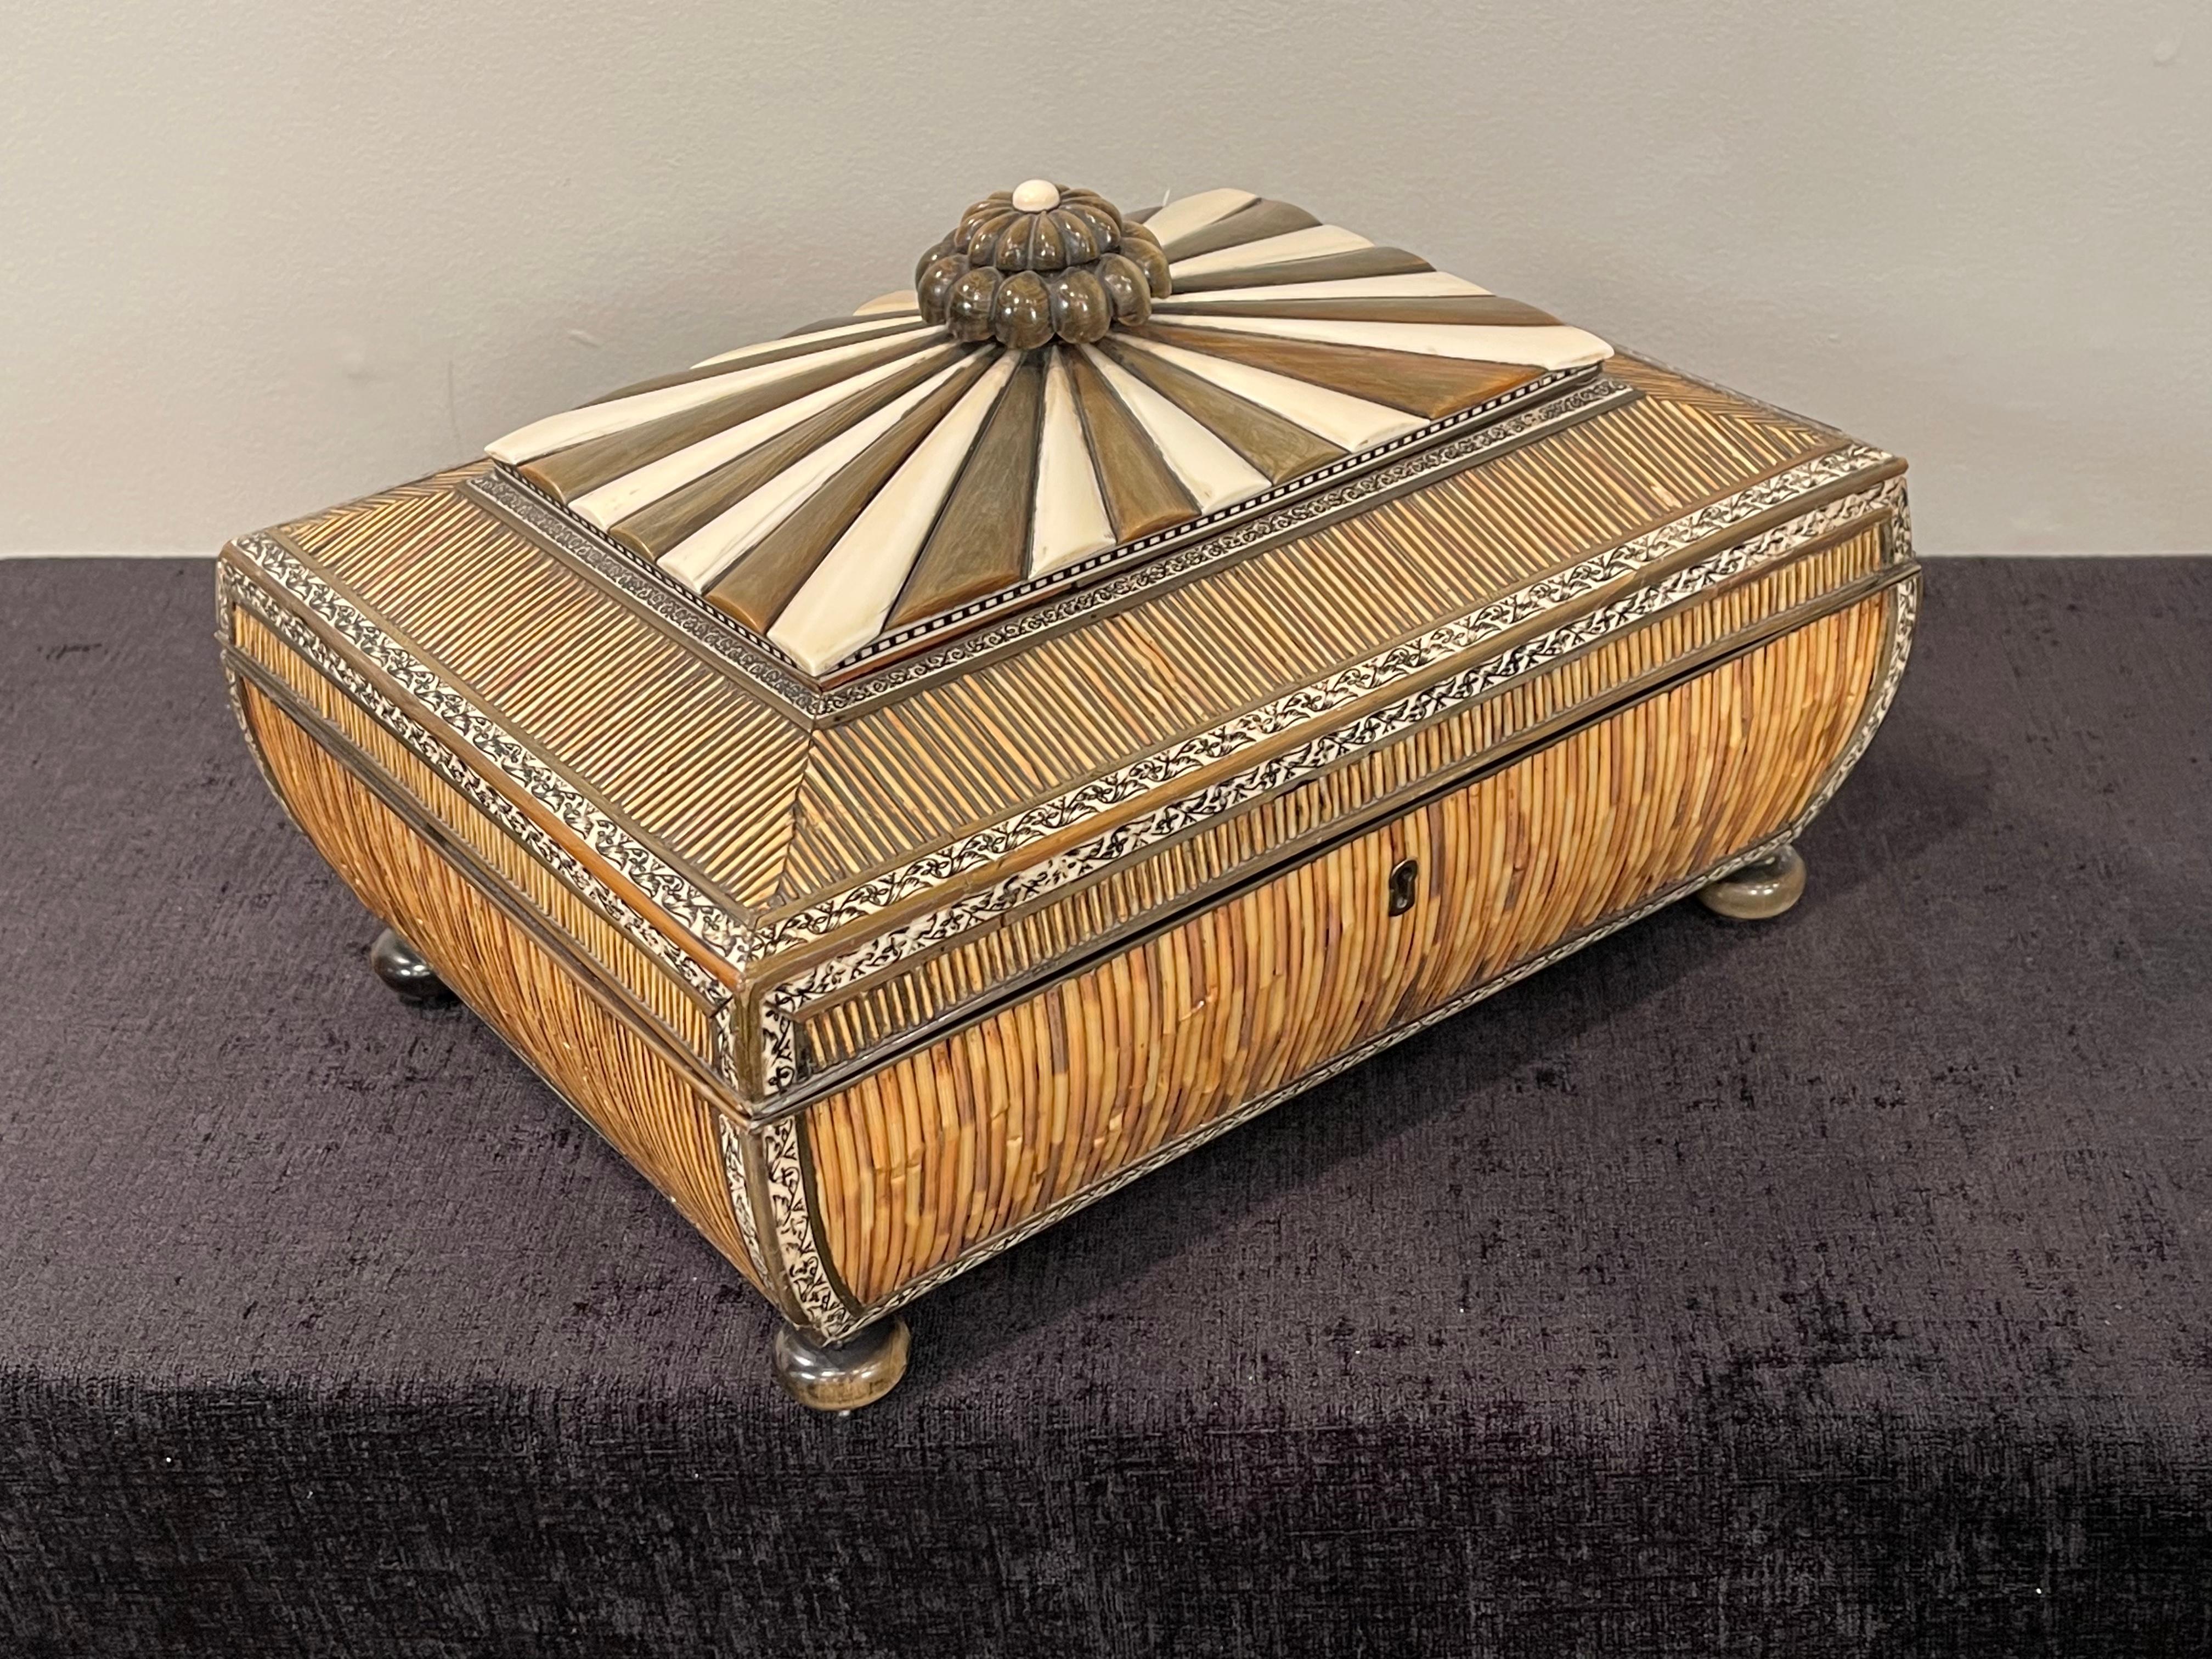 This fine Regency period quill work, bone, ivory & sandalwood sewing box
with intact interior w sewing implements.